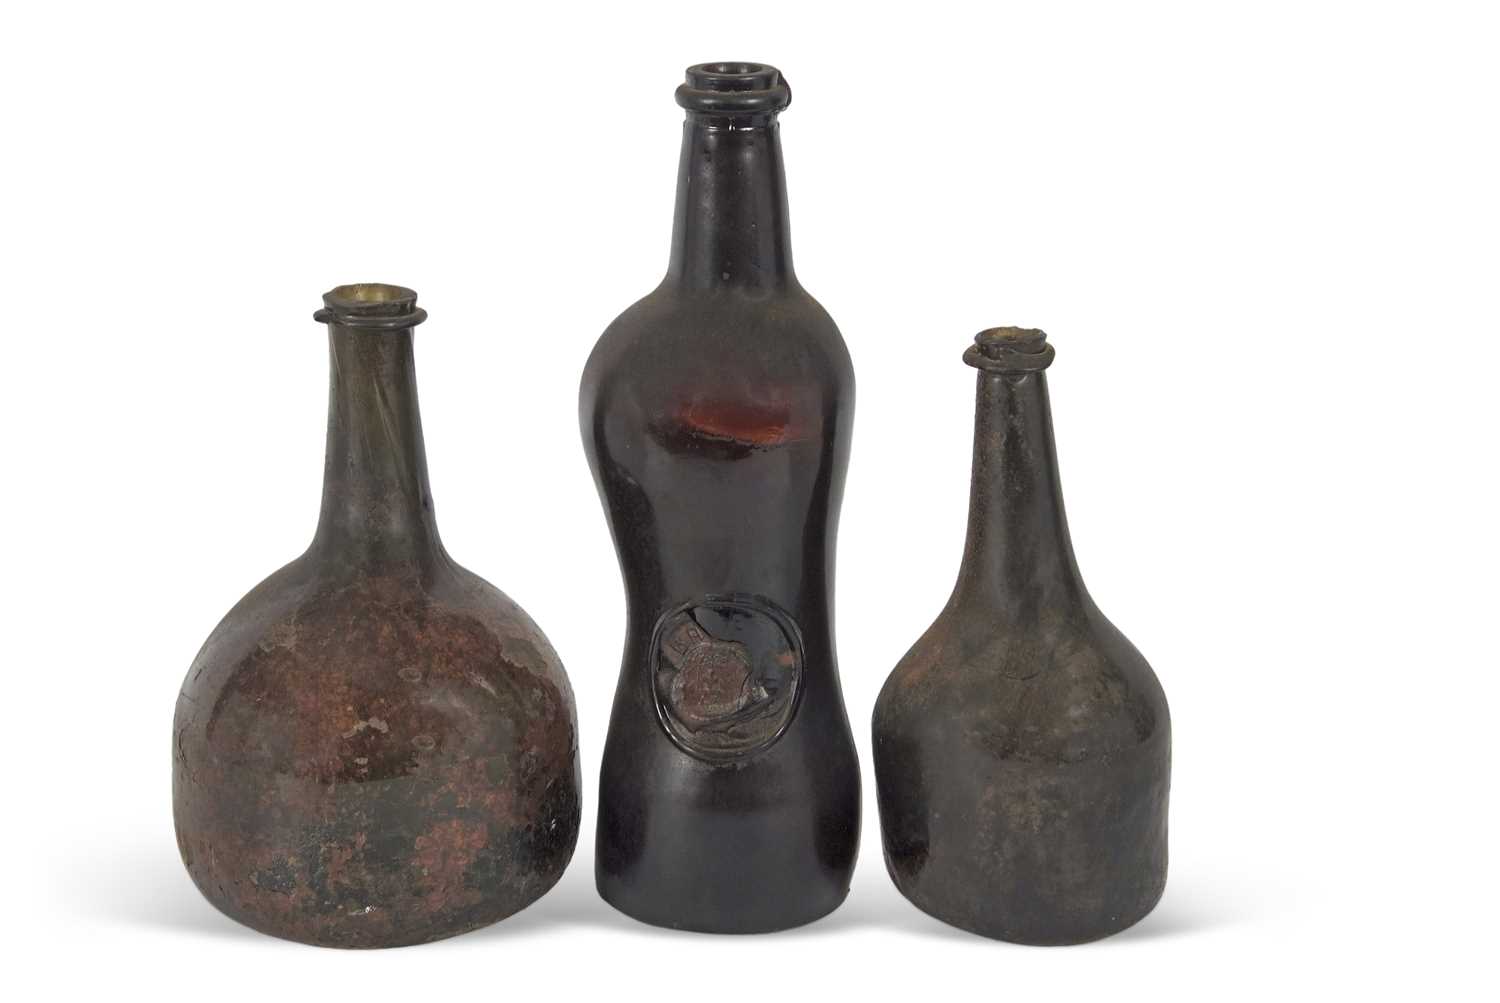 A group of three 18th Century wine bottles, one of onion shape, a further bottle of double gourd